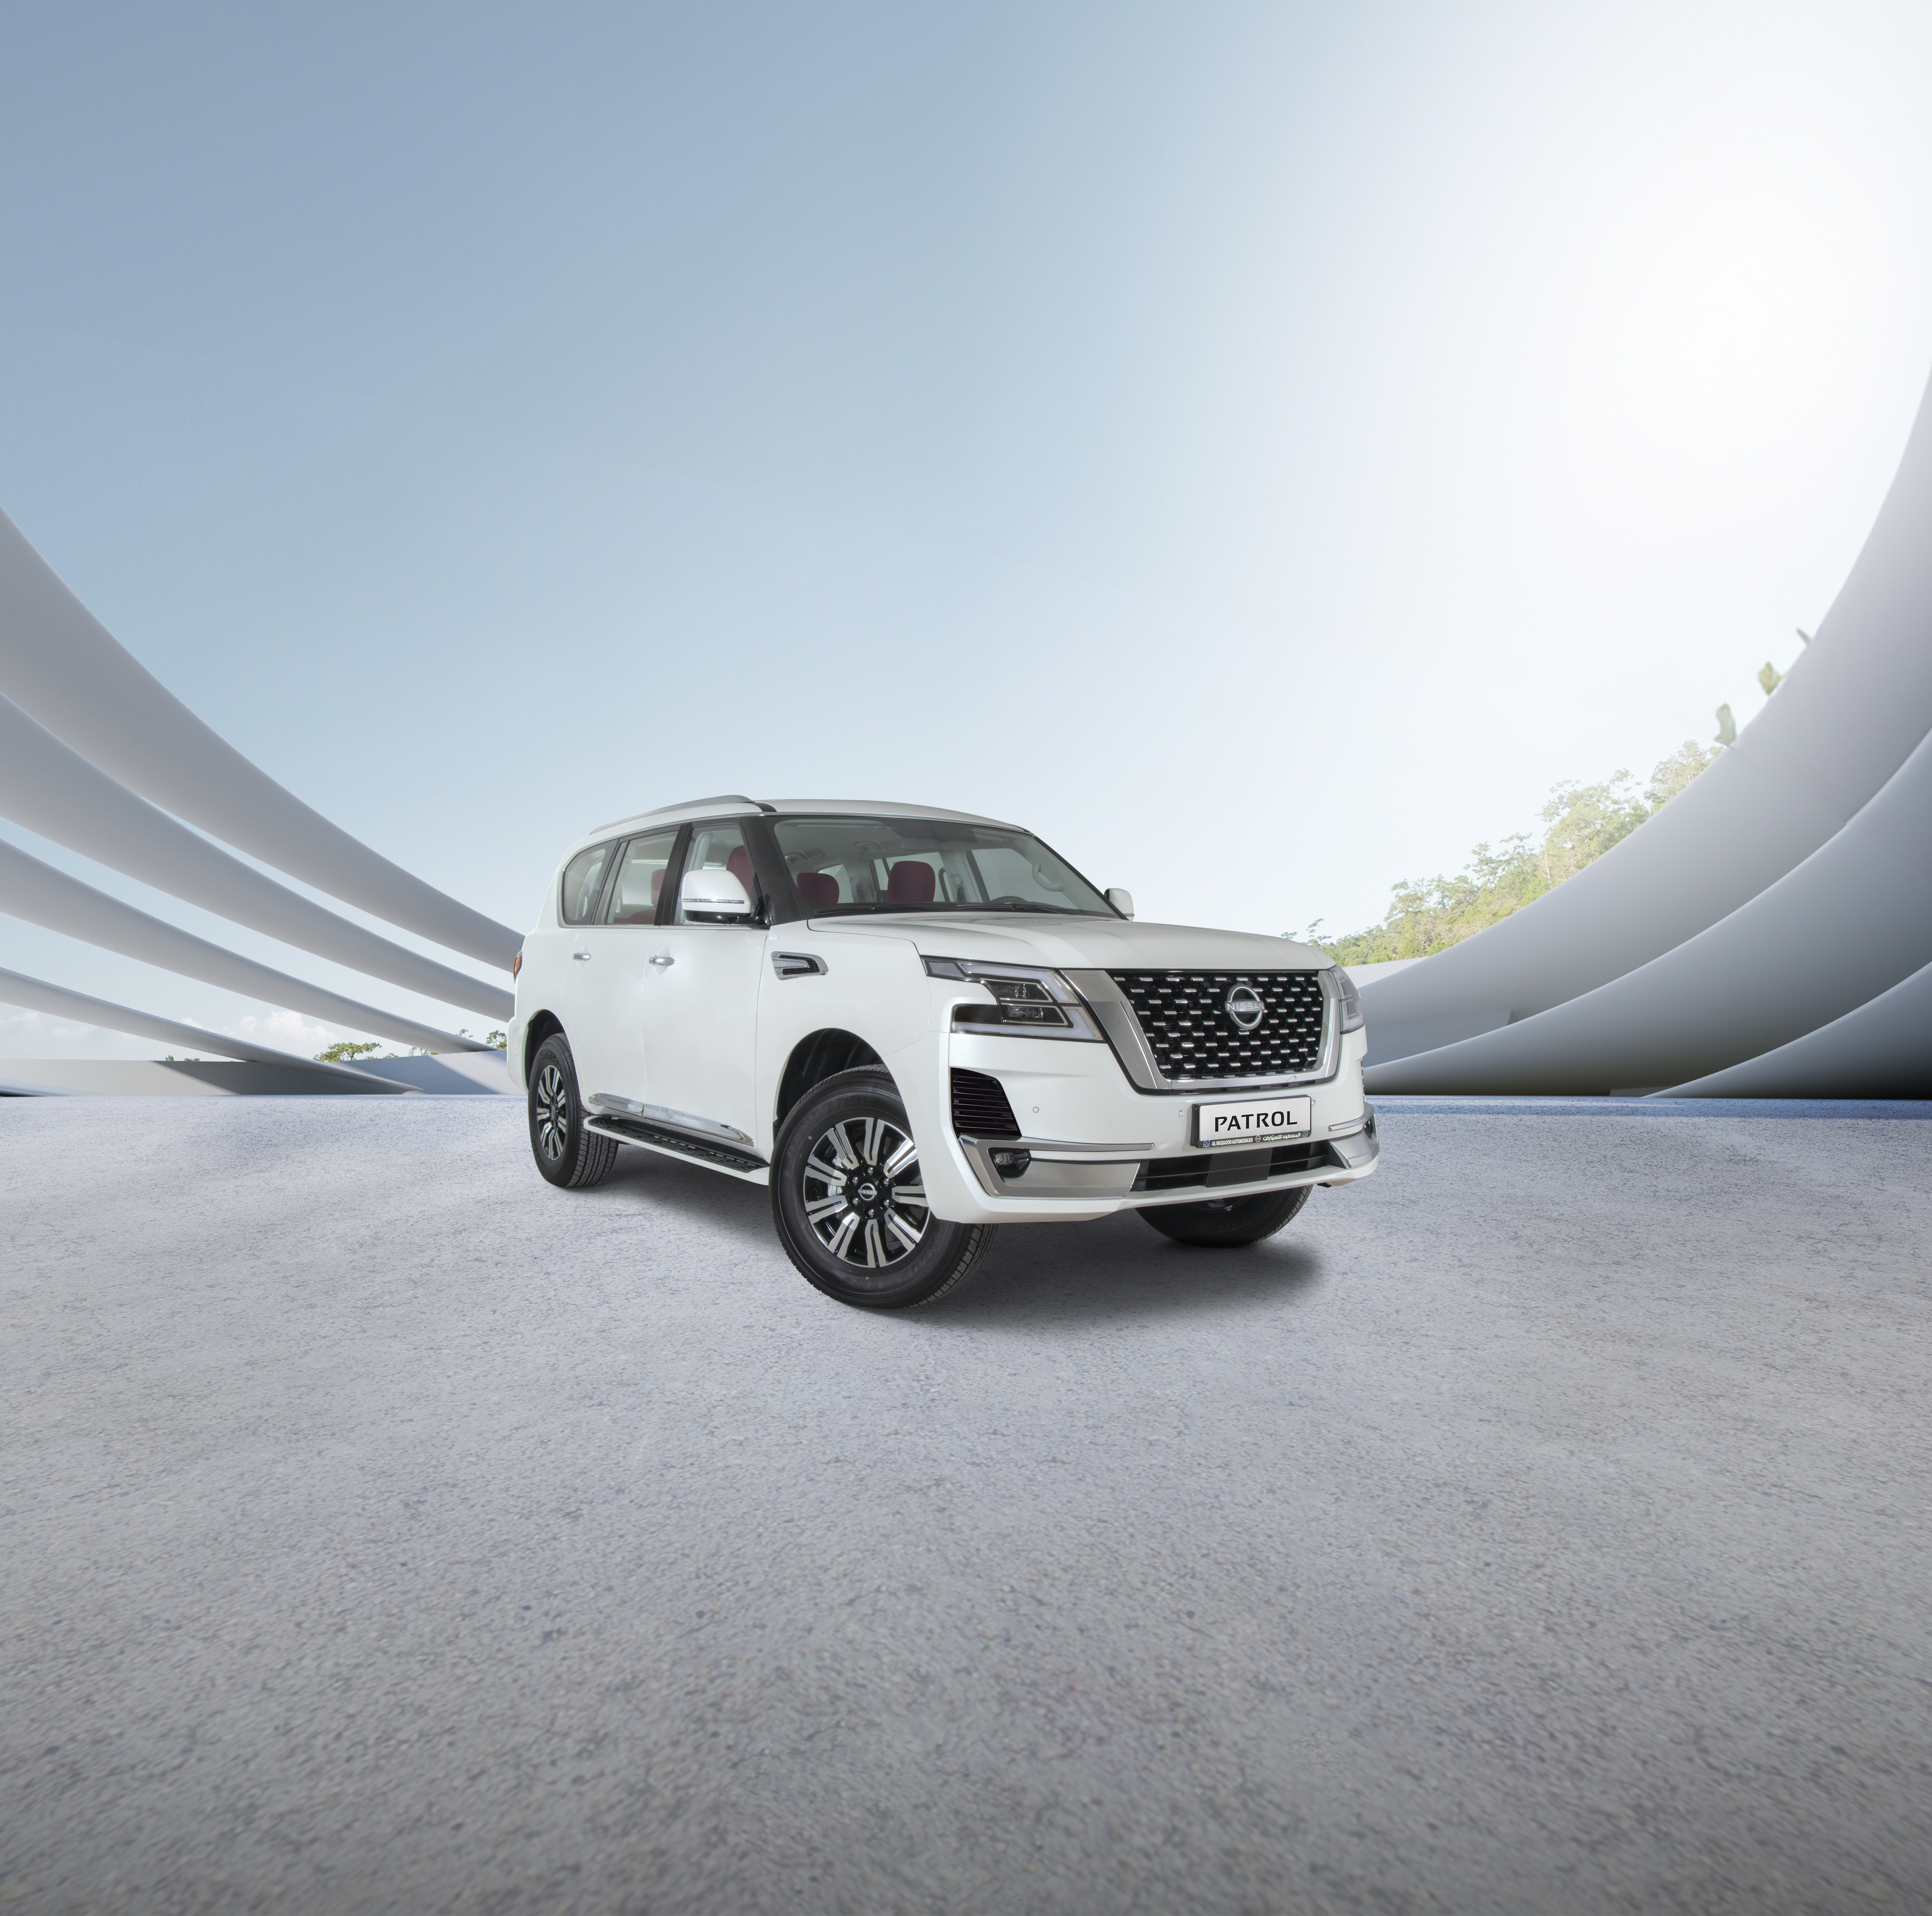 Al Masaood Automobiles Announces the Availability of Nissan Patrol V6 XE with Upgraded Features